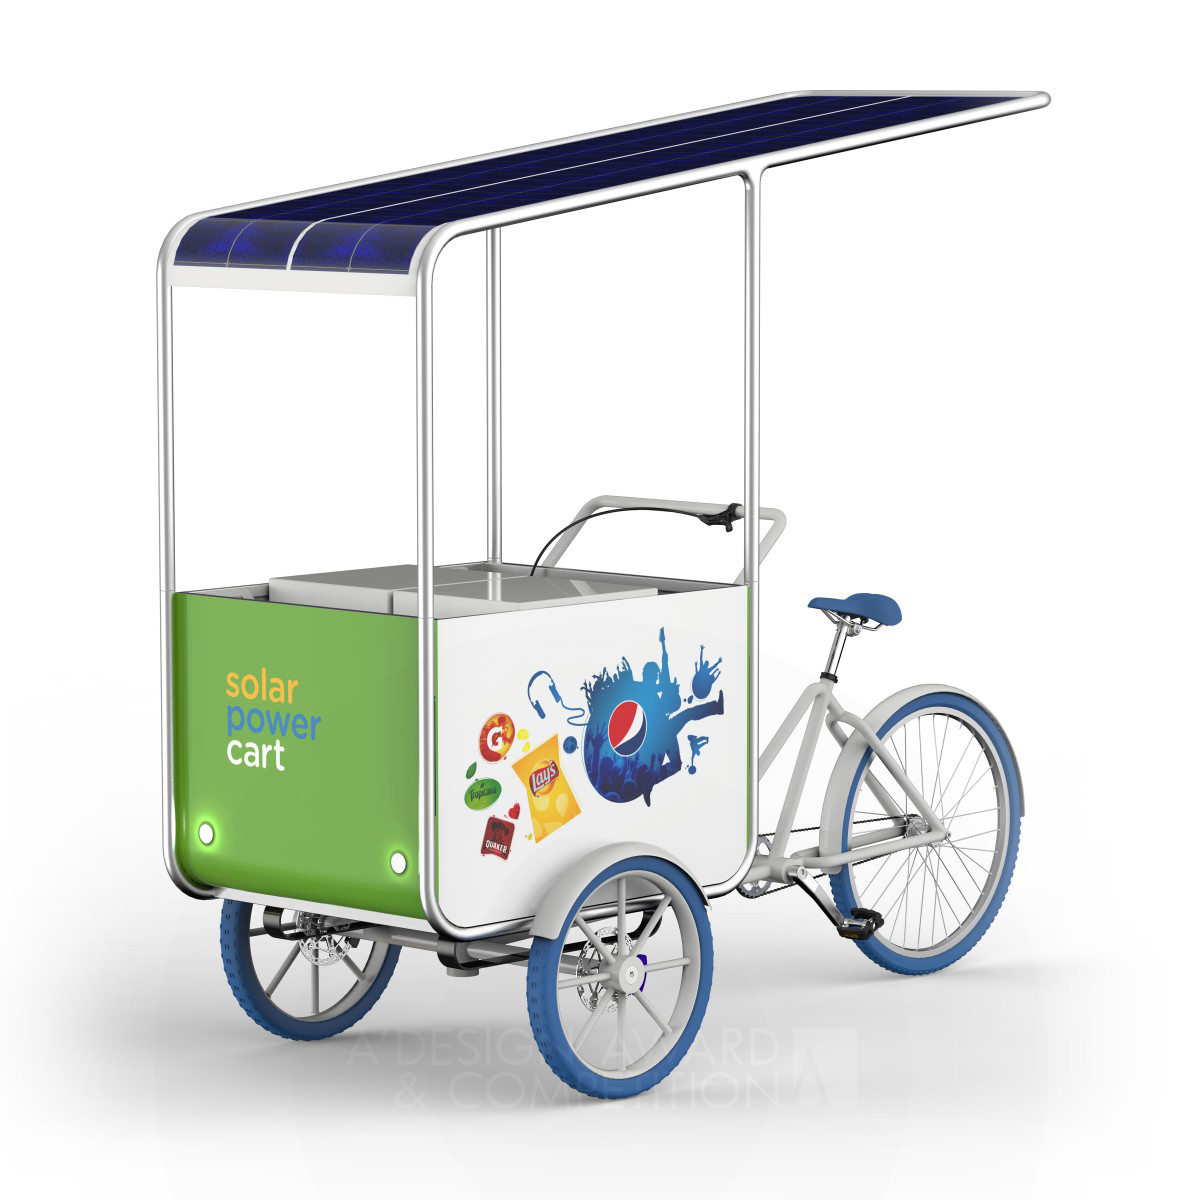 Pepsi Solar Cart Vending Cart Solar Cooler by PepsiCo Design and Innovation Silver Sustainable Products, Projects and Green Design Award Winner 2015 